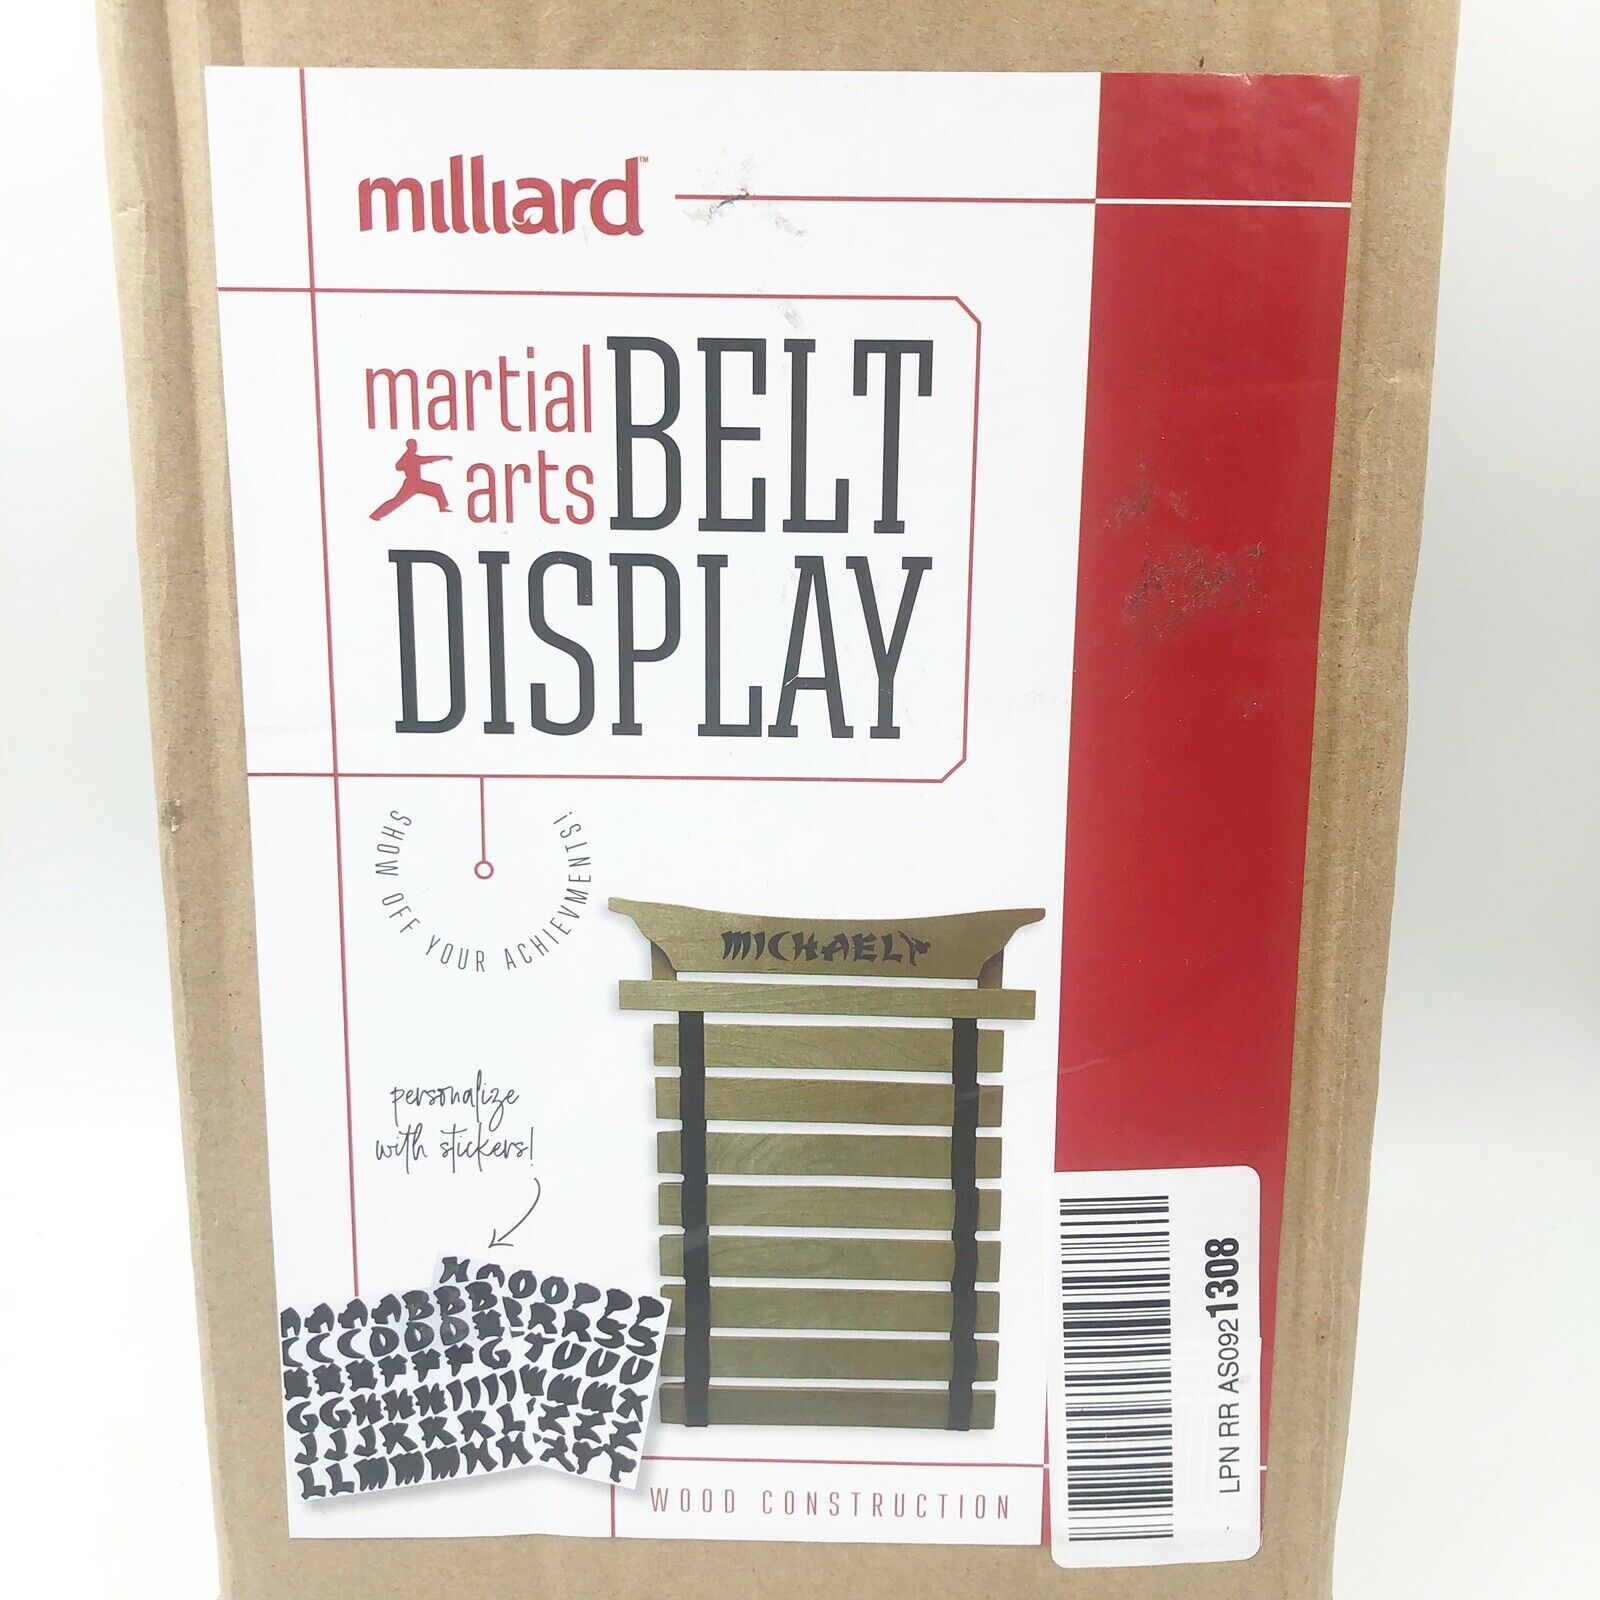 Milliard Karate Belt Display – Holds 8 Martial Arts Belts Personalize With Name